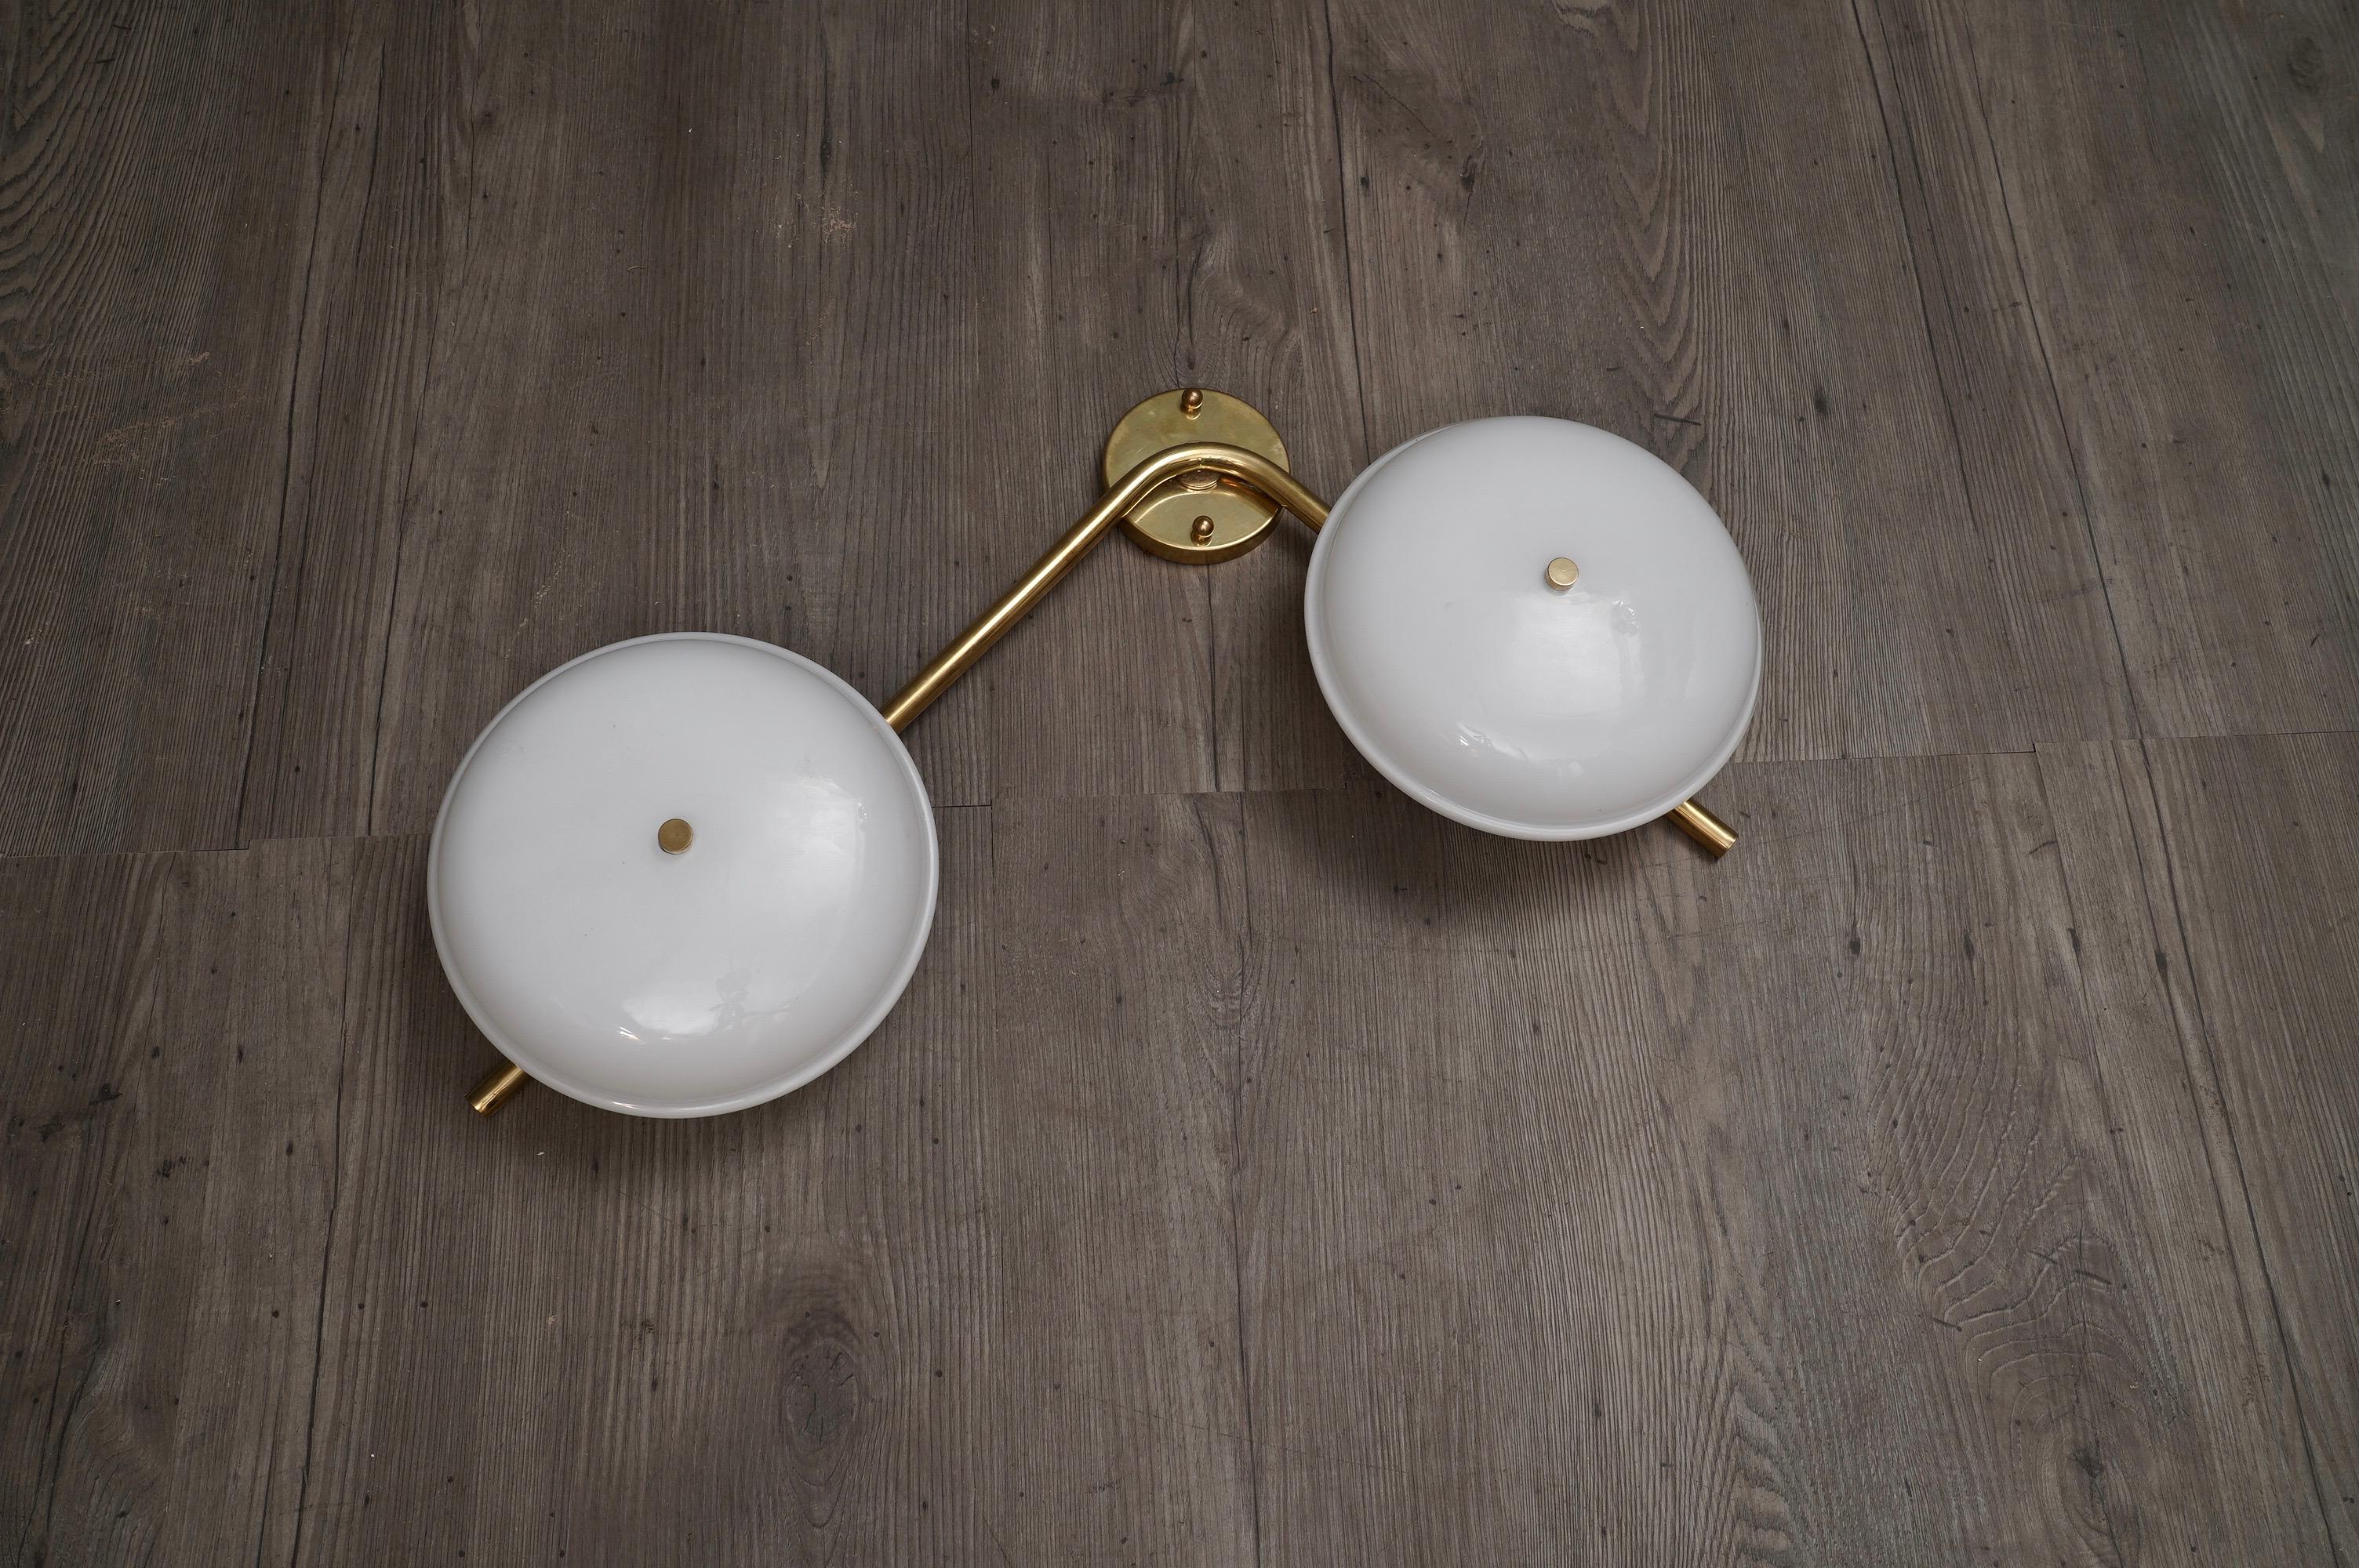 Linear and simple these wall lamps in white Murano glass. A light brass tube combines two white Murano glass globes.

Composed of a brass structure, to which two globes in white glass are joined. Simple but impressive, very bright. As you can see